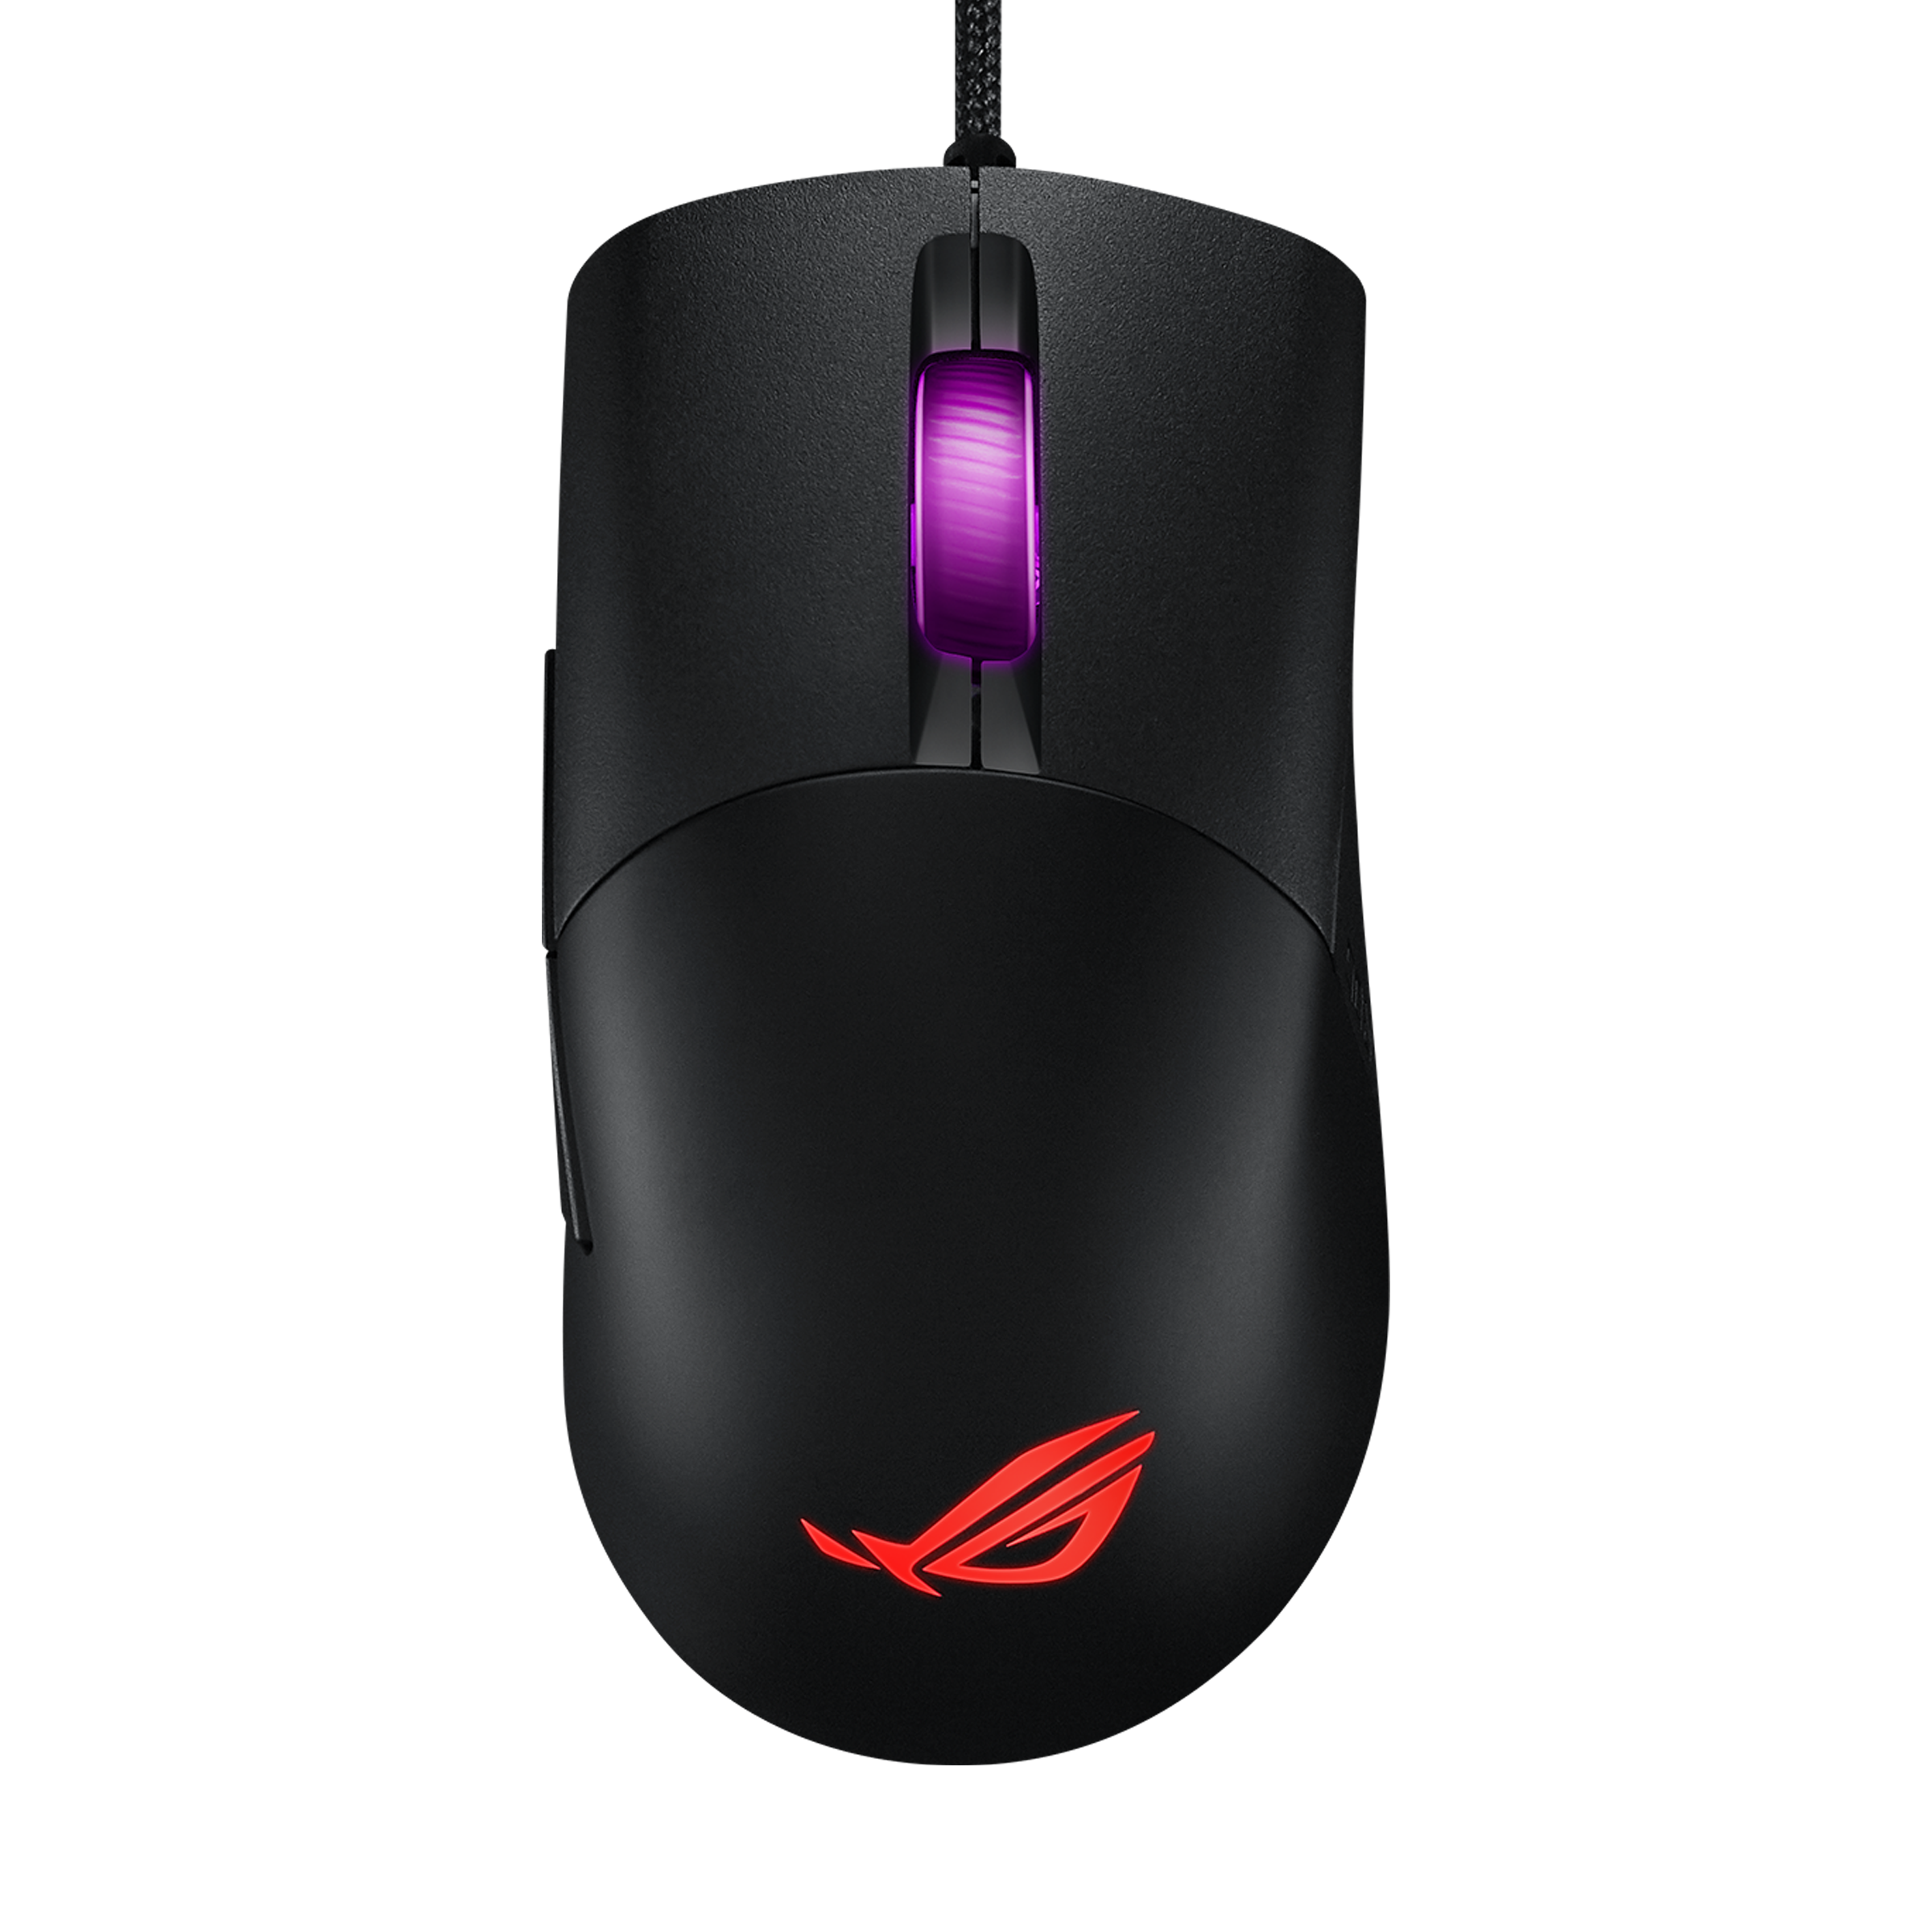 How to improve mouse precision - Dot Esports